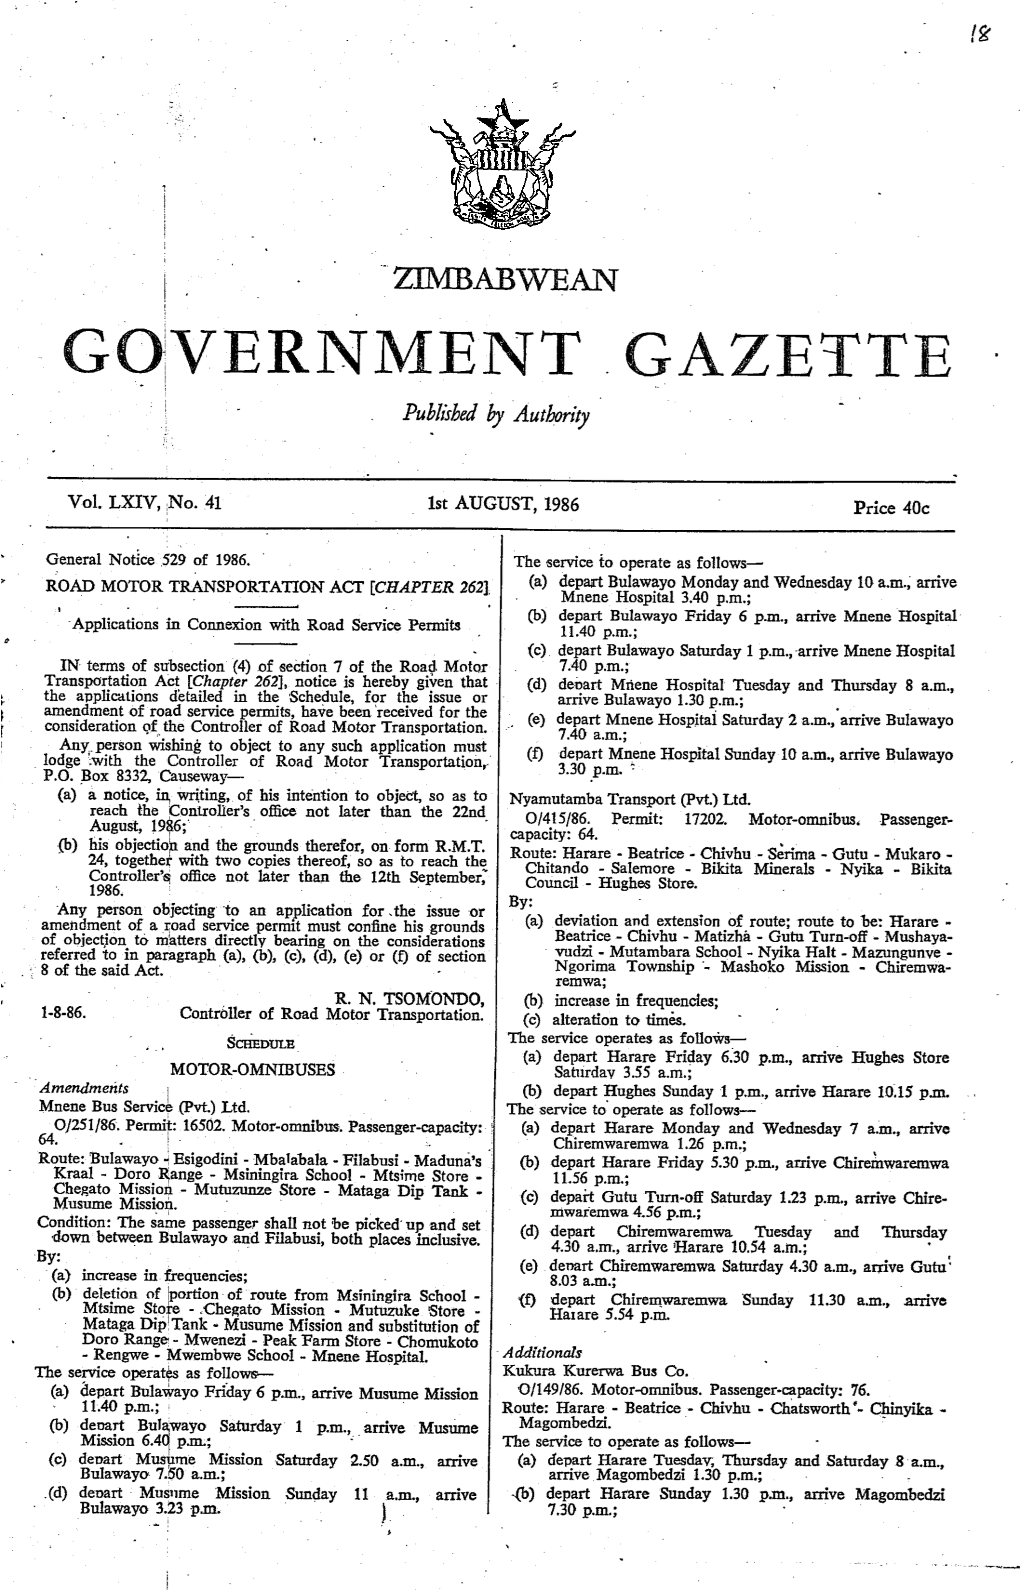 GQVERNMENT GAZETTE Published by Authority